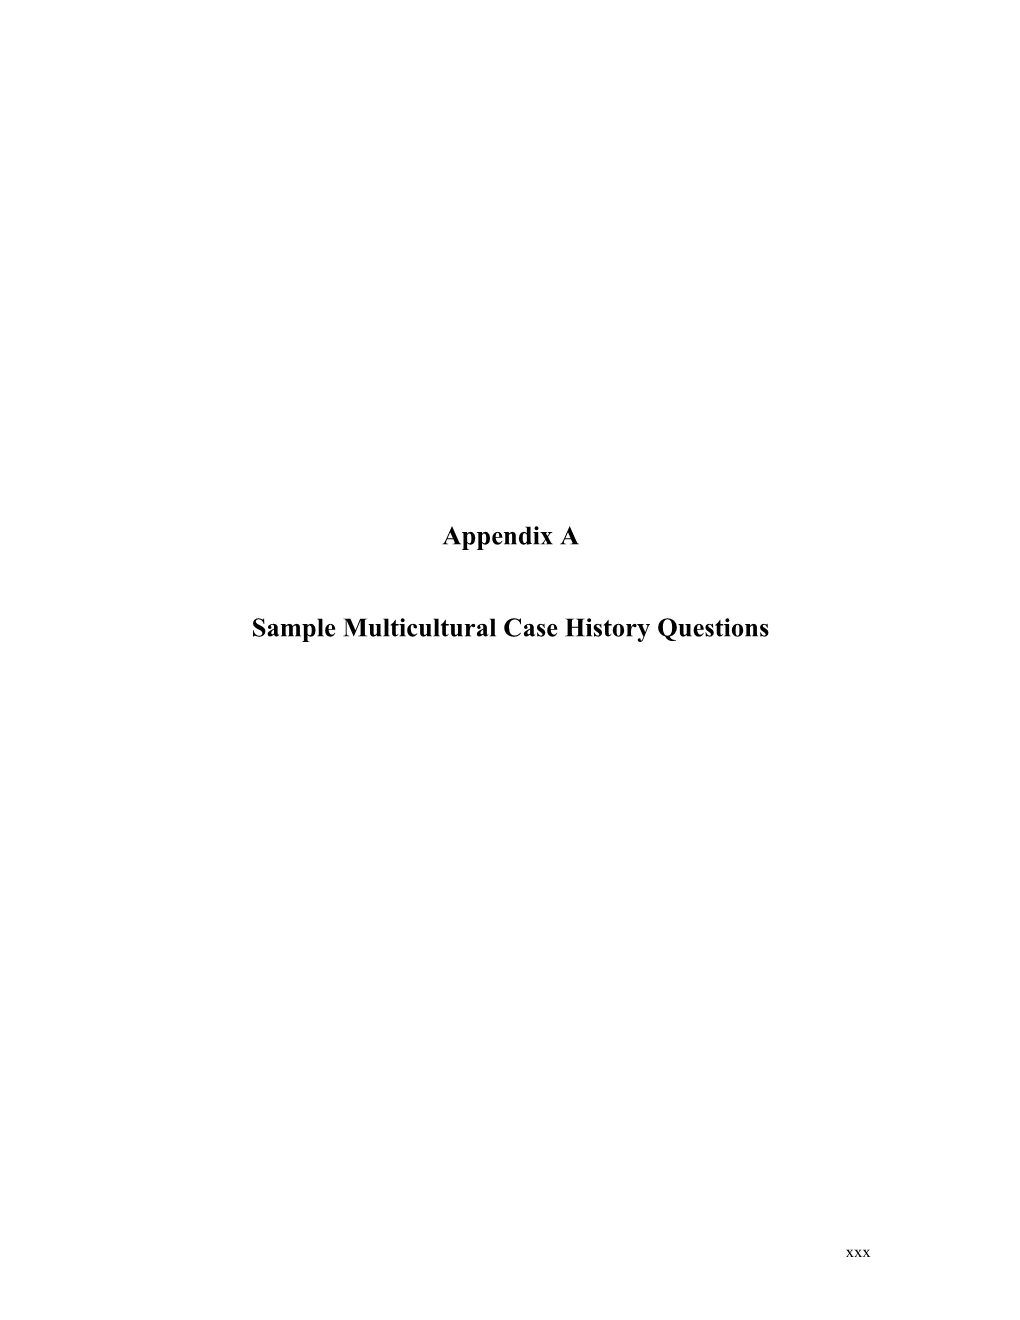 Sample Multicultural Case History Questions